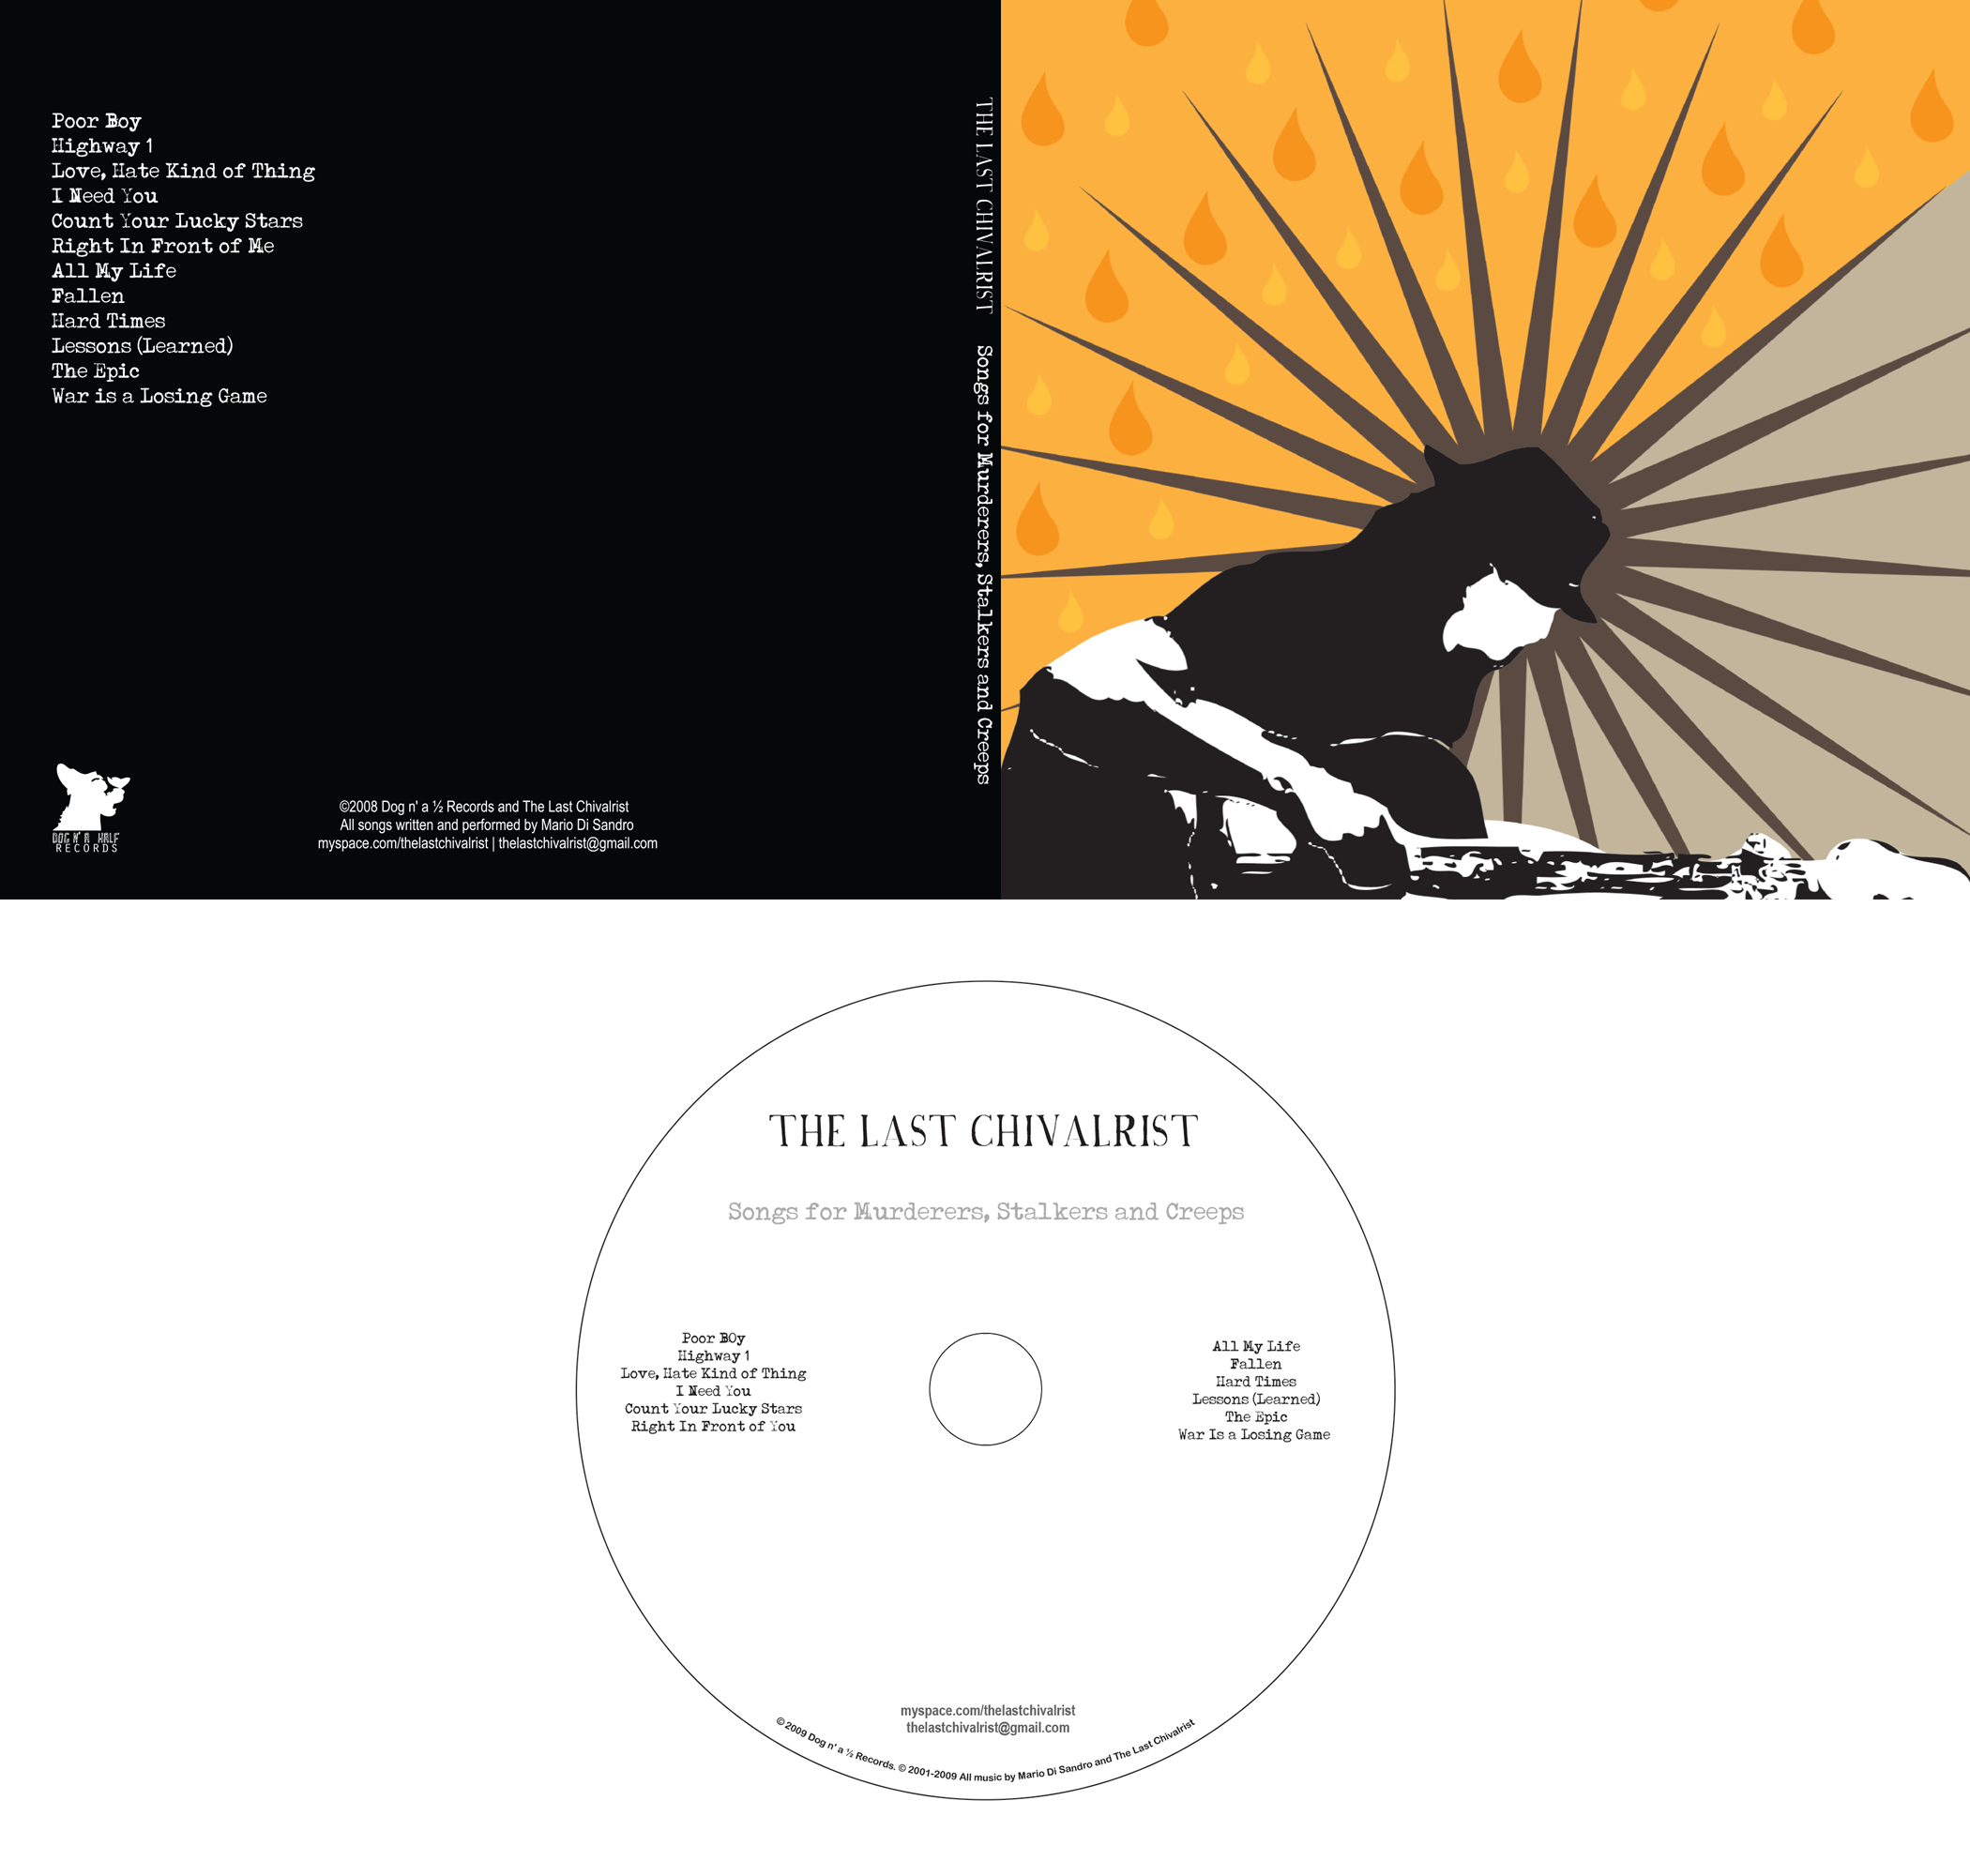 Client: The Last Chivalrist, Chicago singer-songwriter, touring musician. Description: Album layout design for The Last Chivalrist's album 'Songs for Murderers, Stalkers and Creeps'.